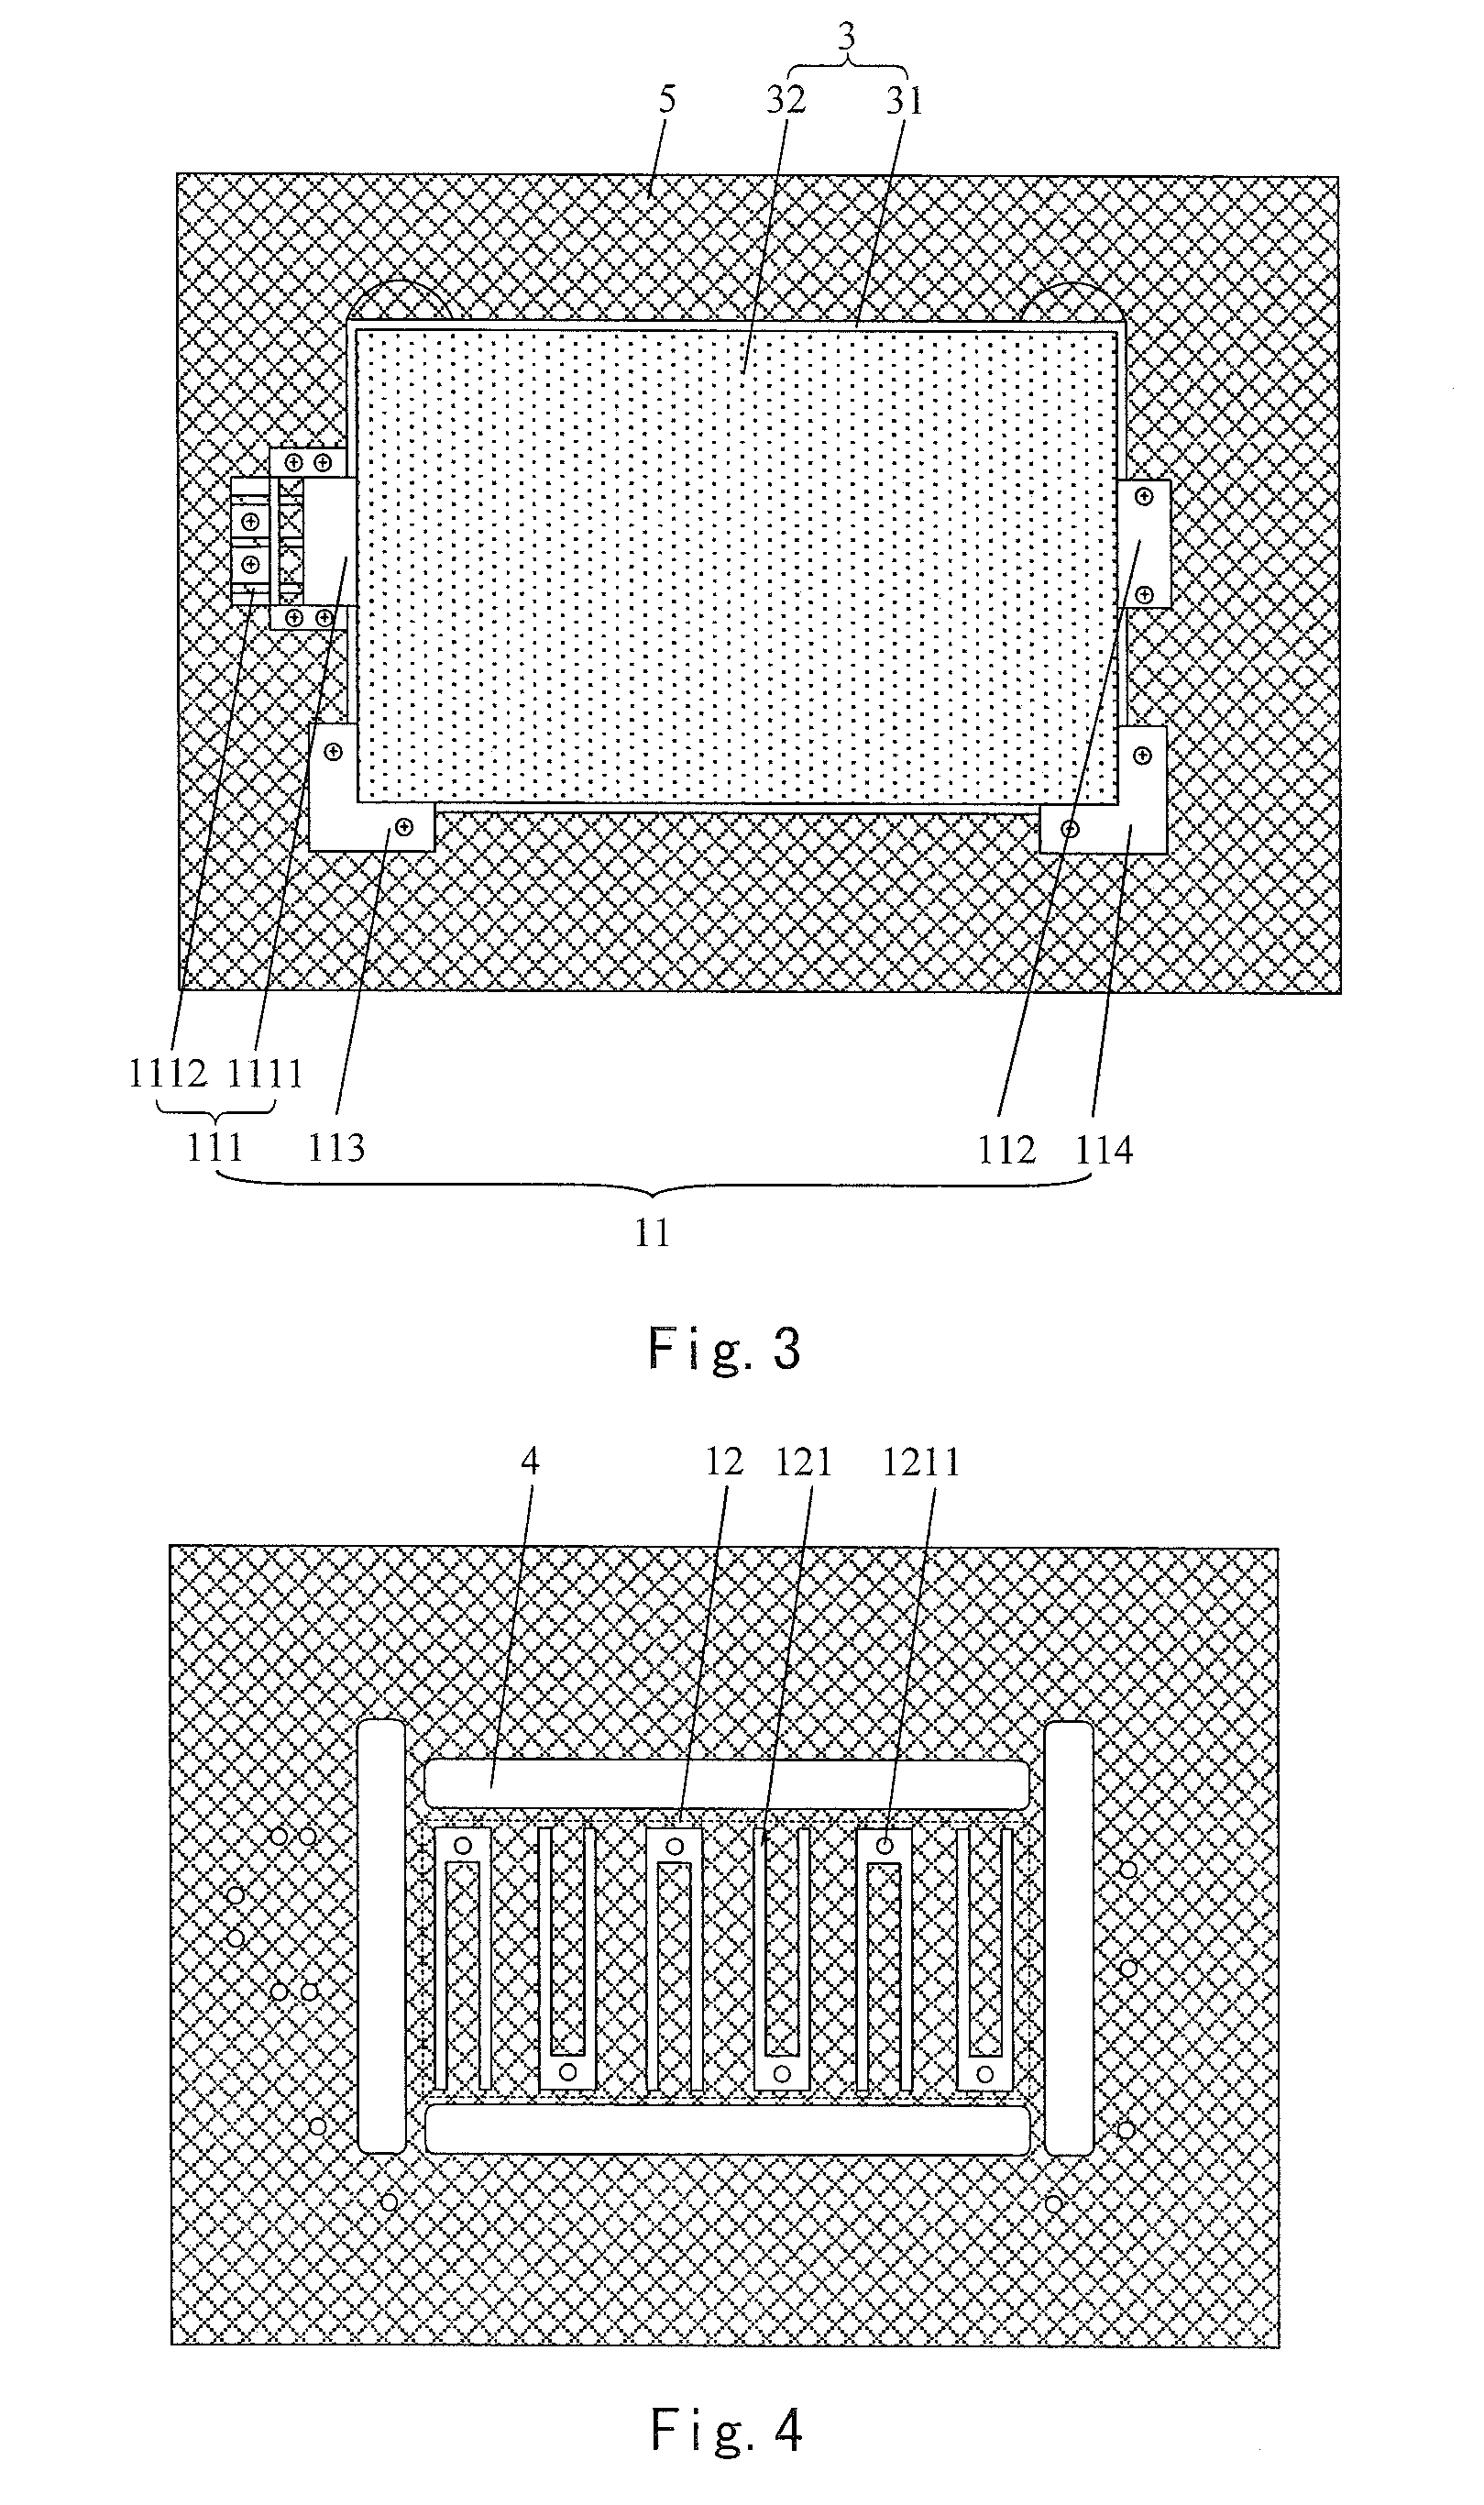 Jig for detaching display assembly